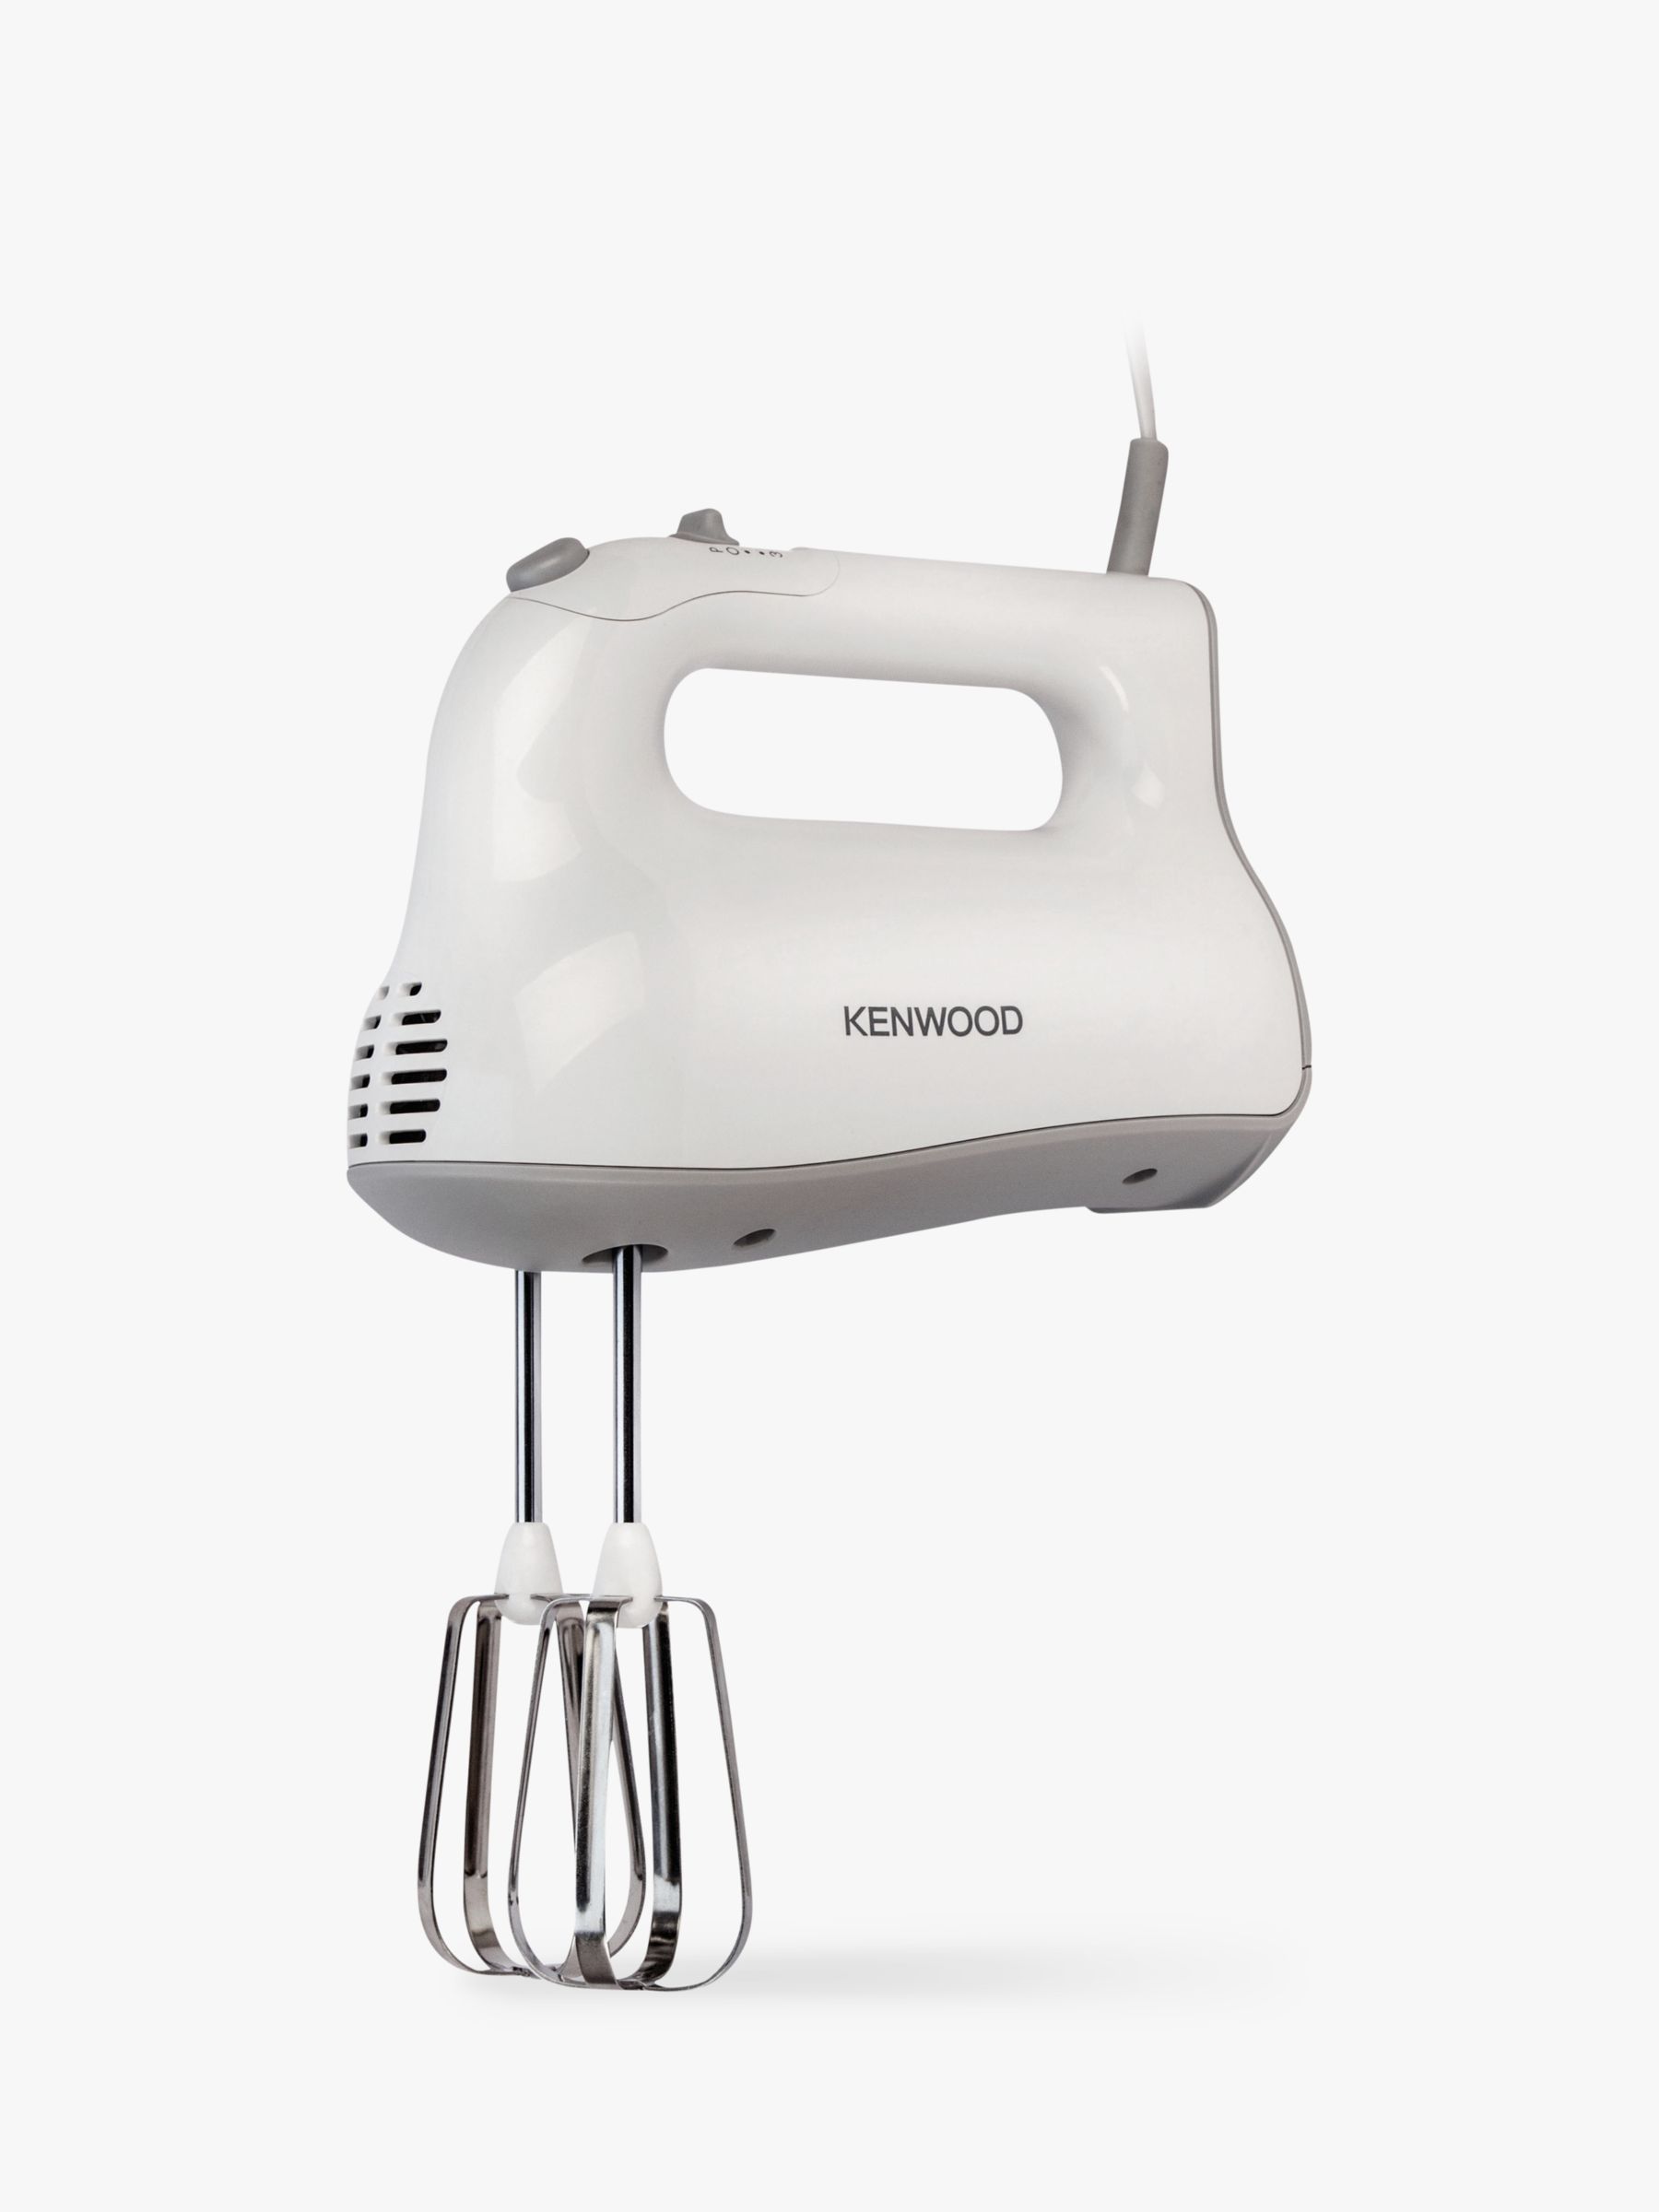 Kenwood HM520 Hand Mixer in White